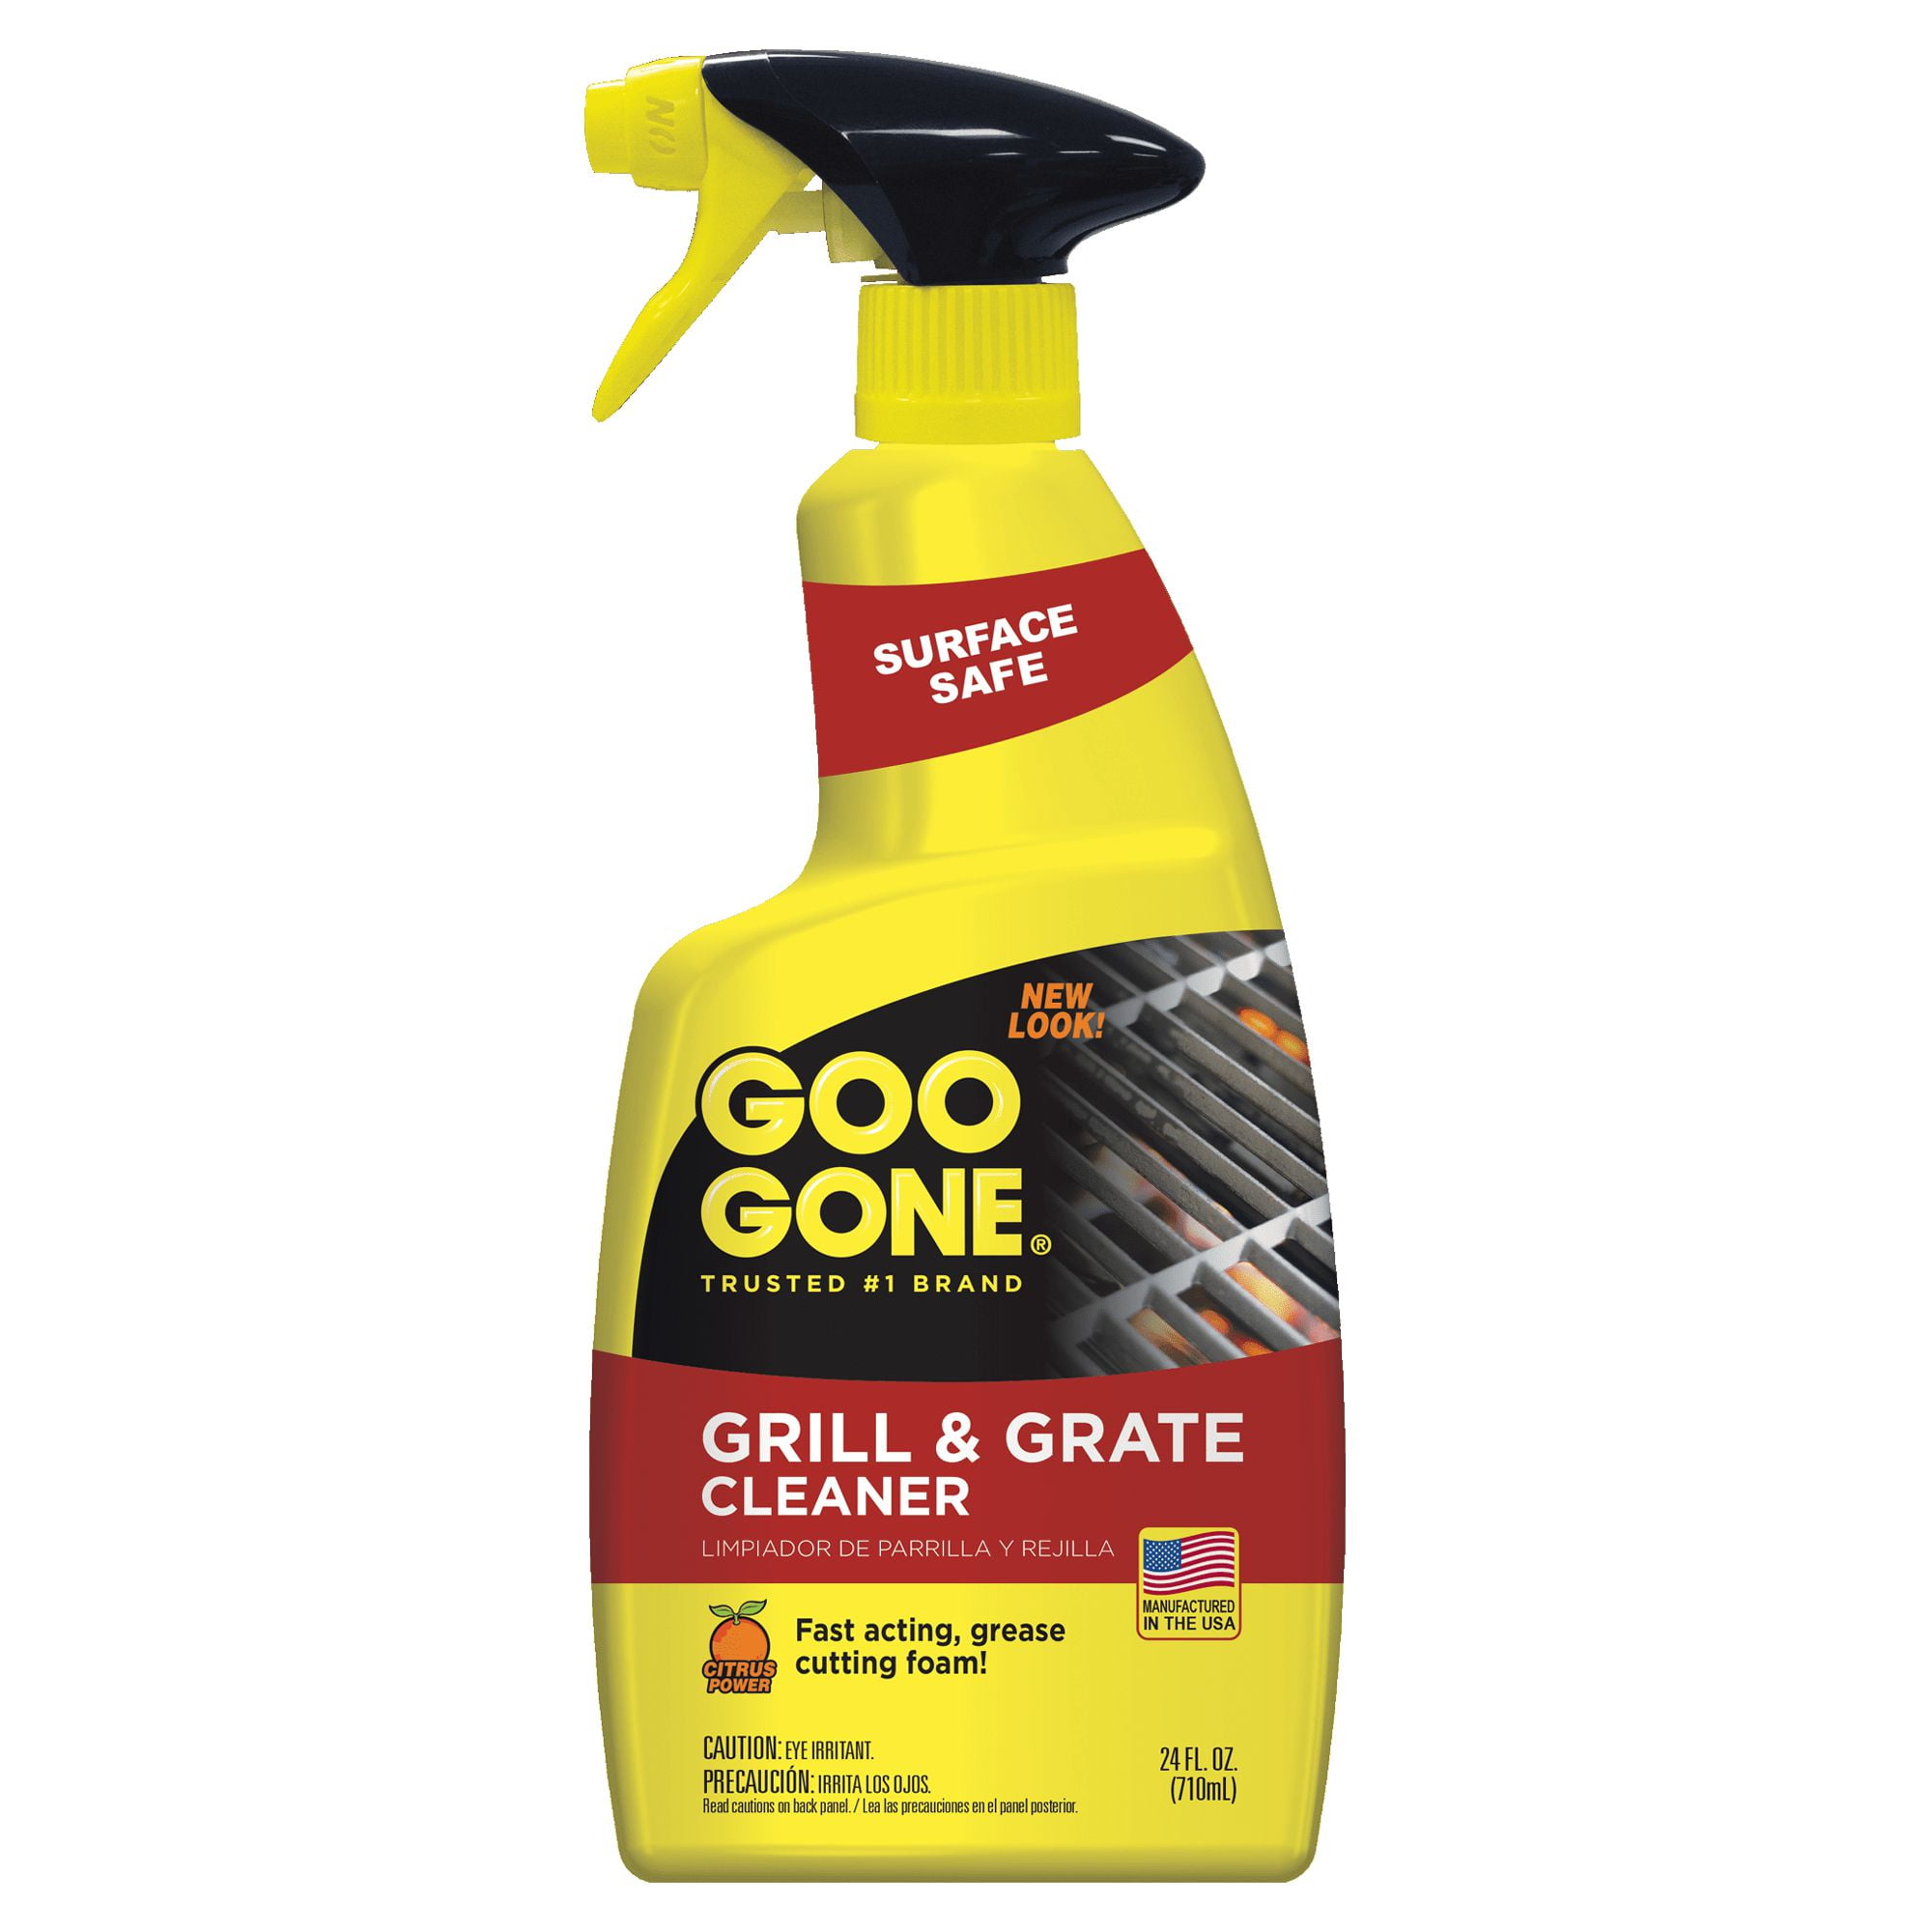 Goo Gone Degreaser Household Cleaning Products for sale